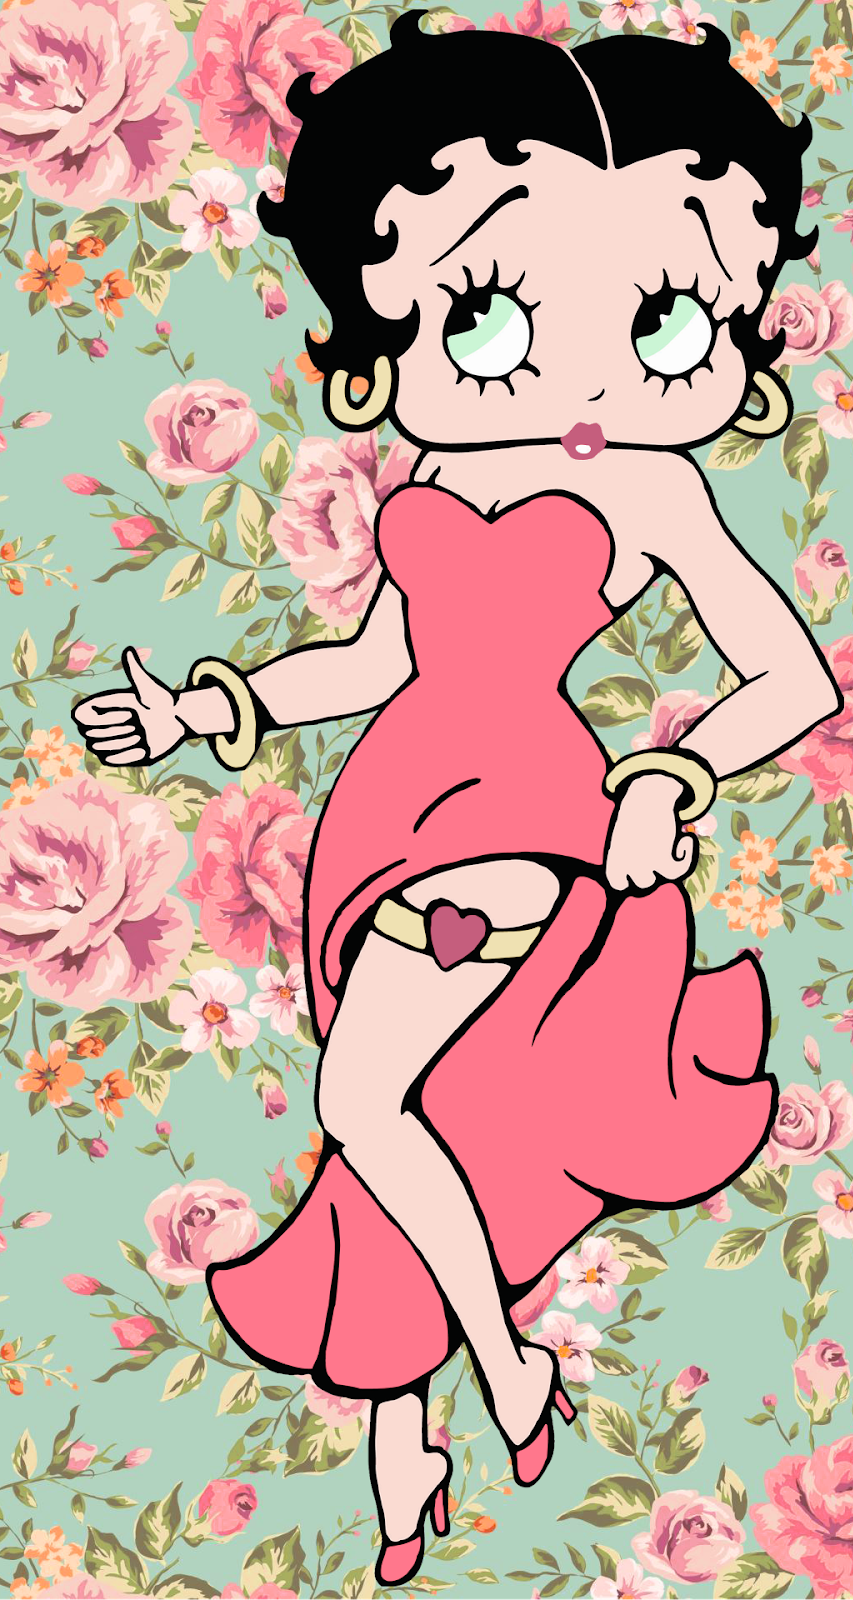 Download Betty Boop - A Pop Culture Icon | Wallpapers.com